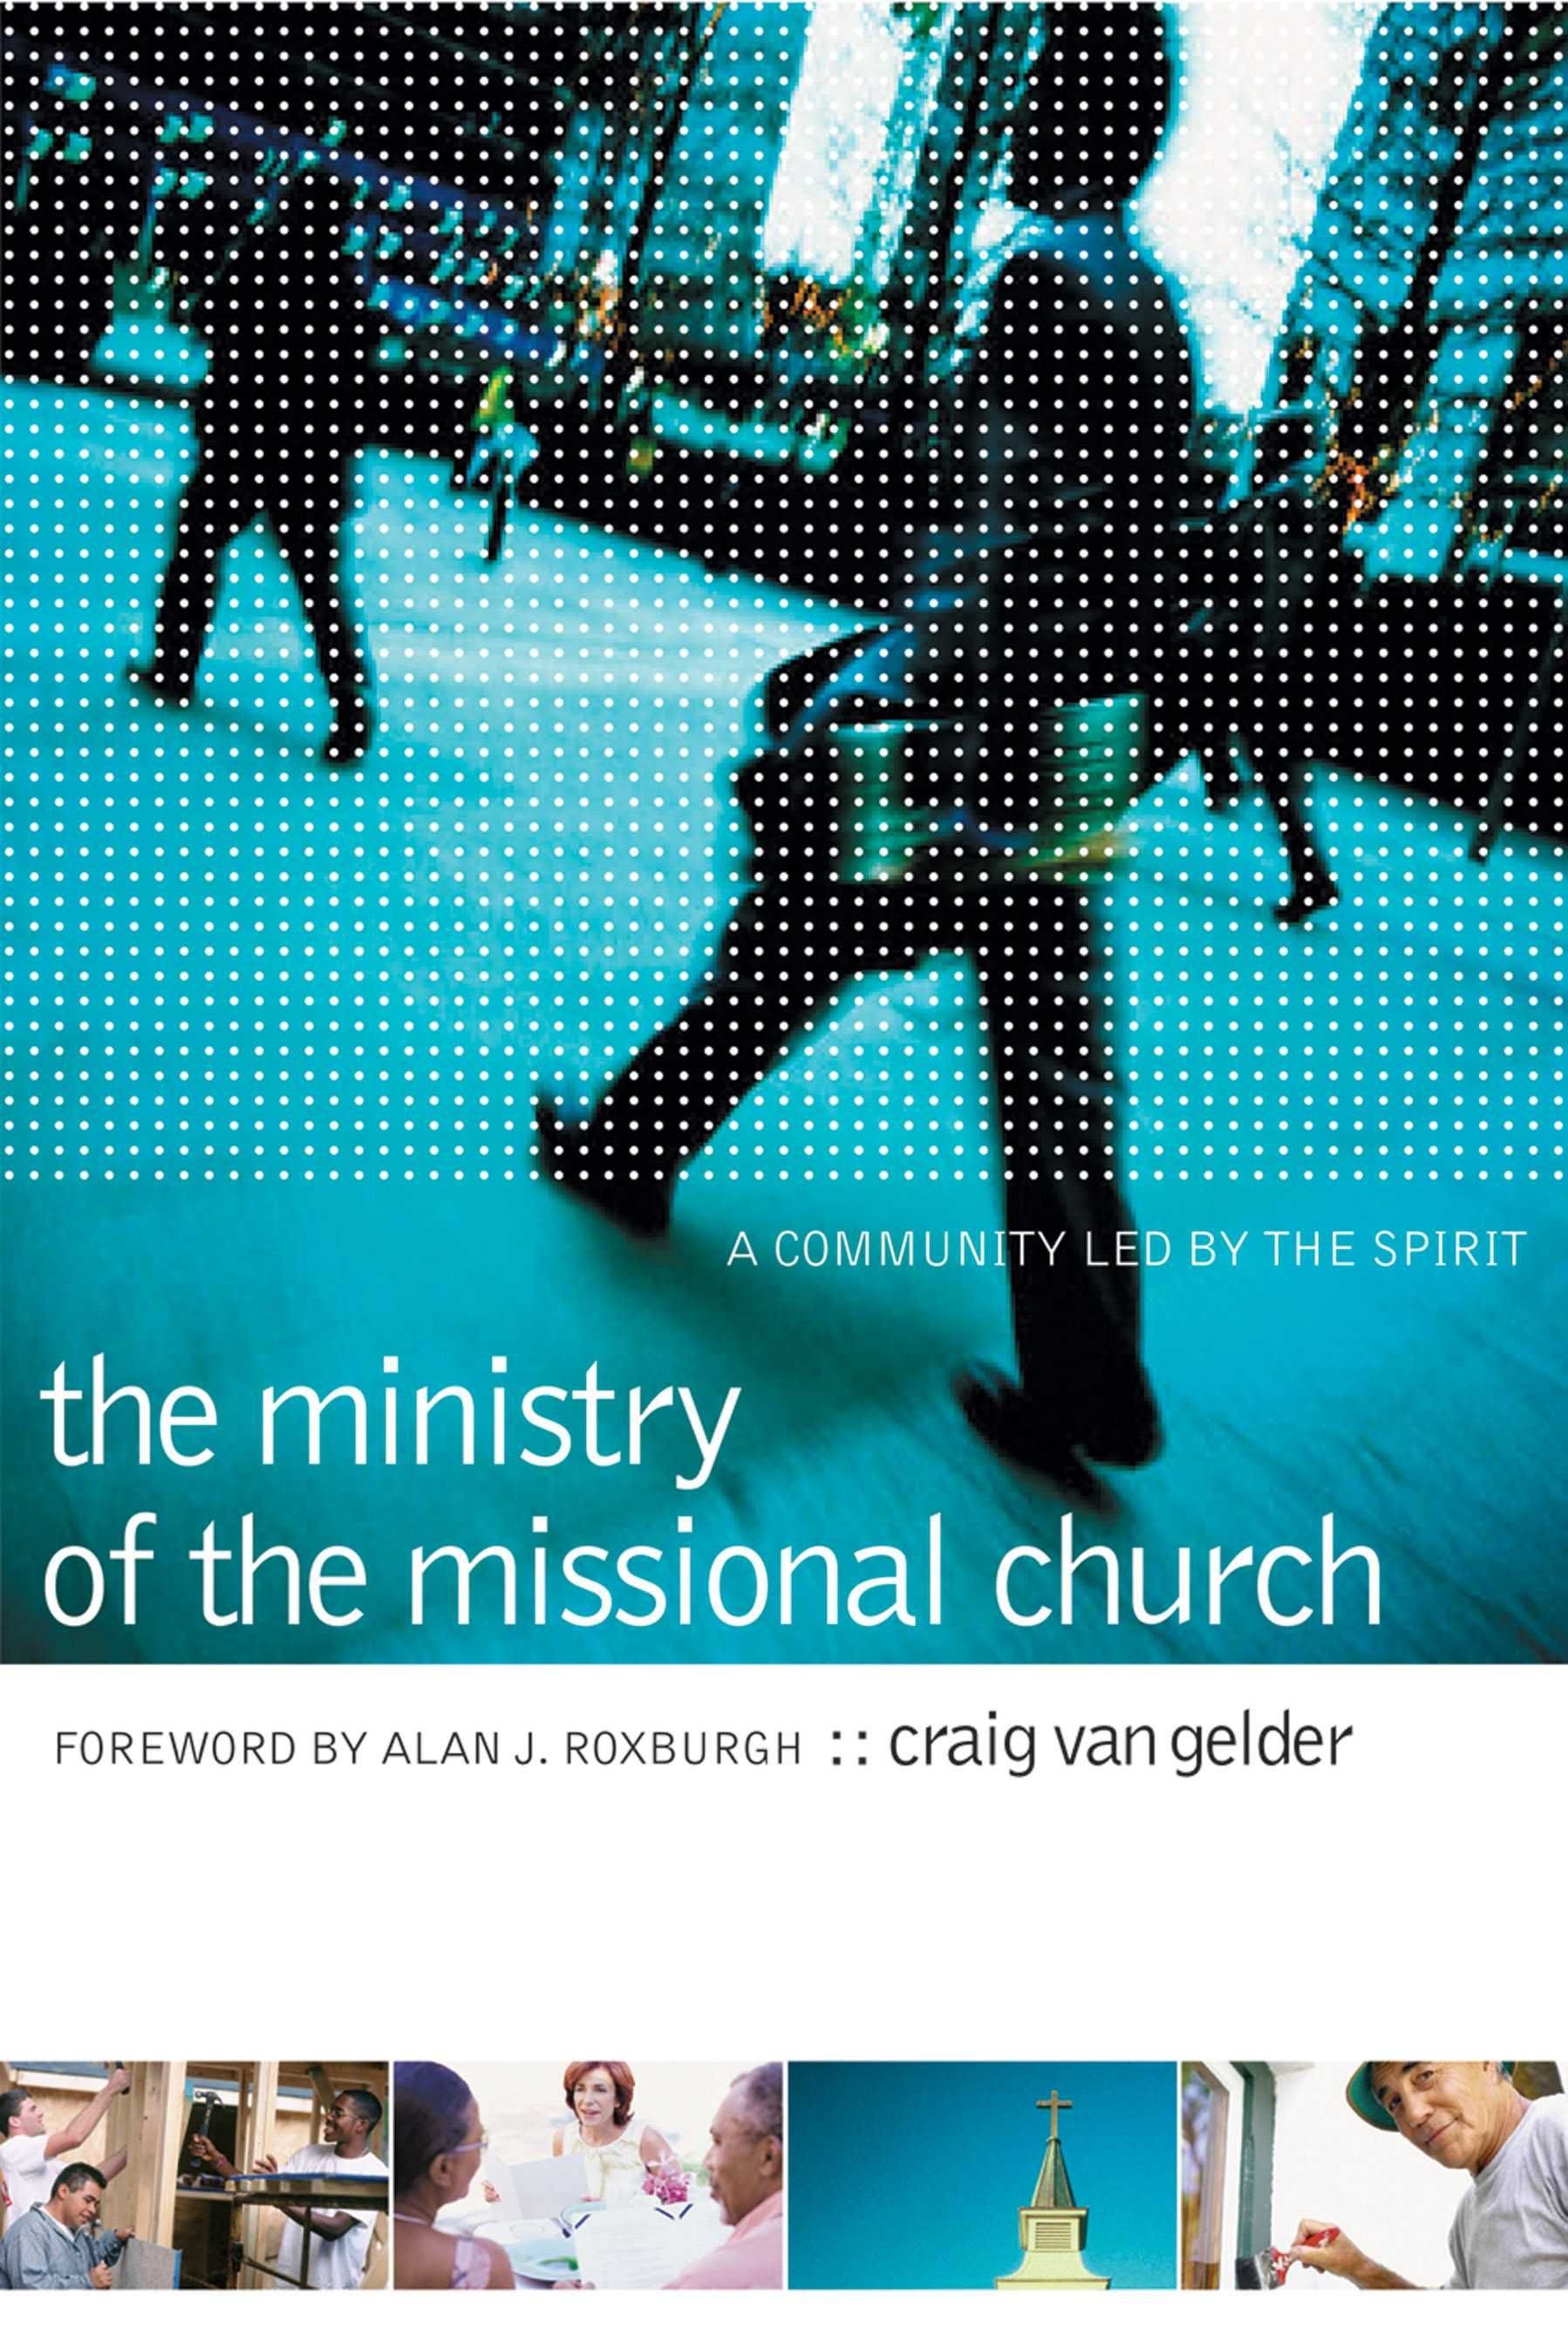 The Ministry of the Missional Church - A Community Led by the Spirit